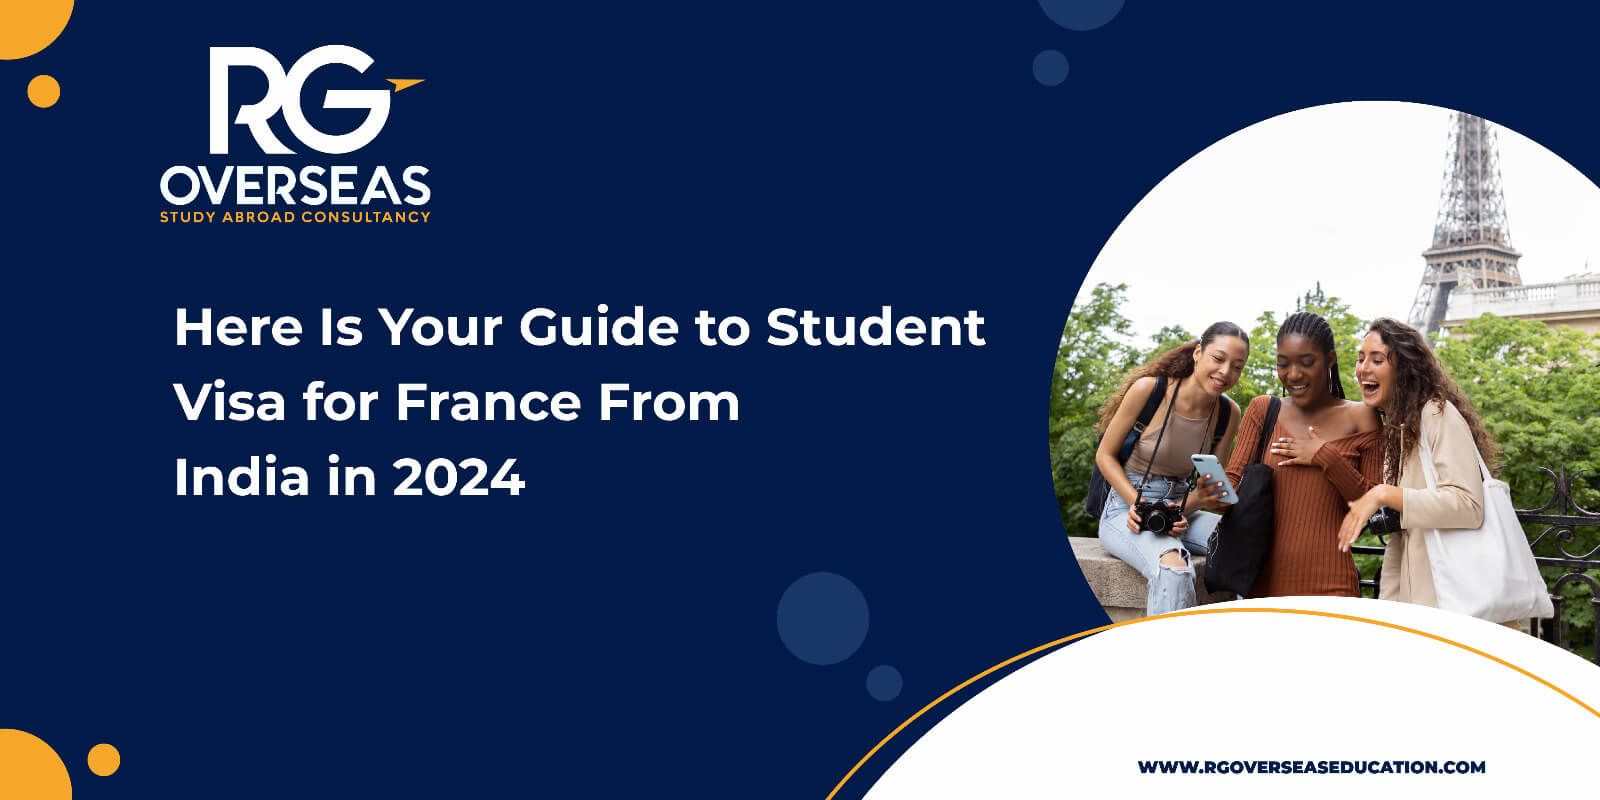 Here Is Your Guide to Student Visa for France From India in 2024